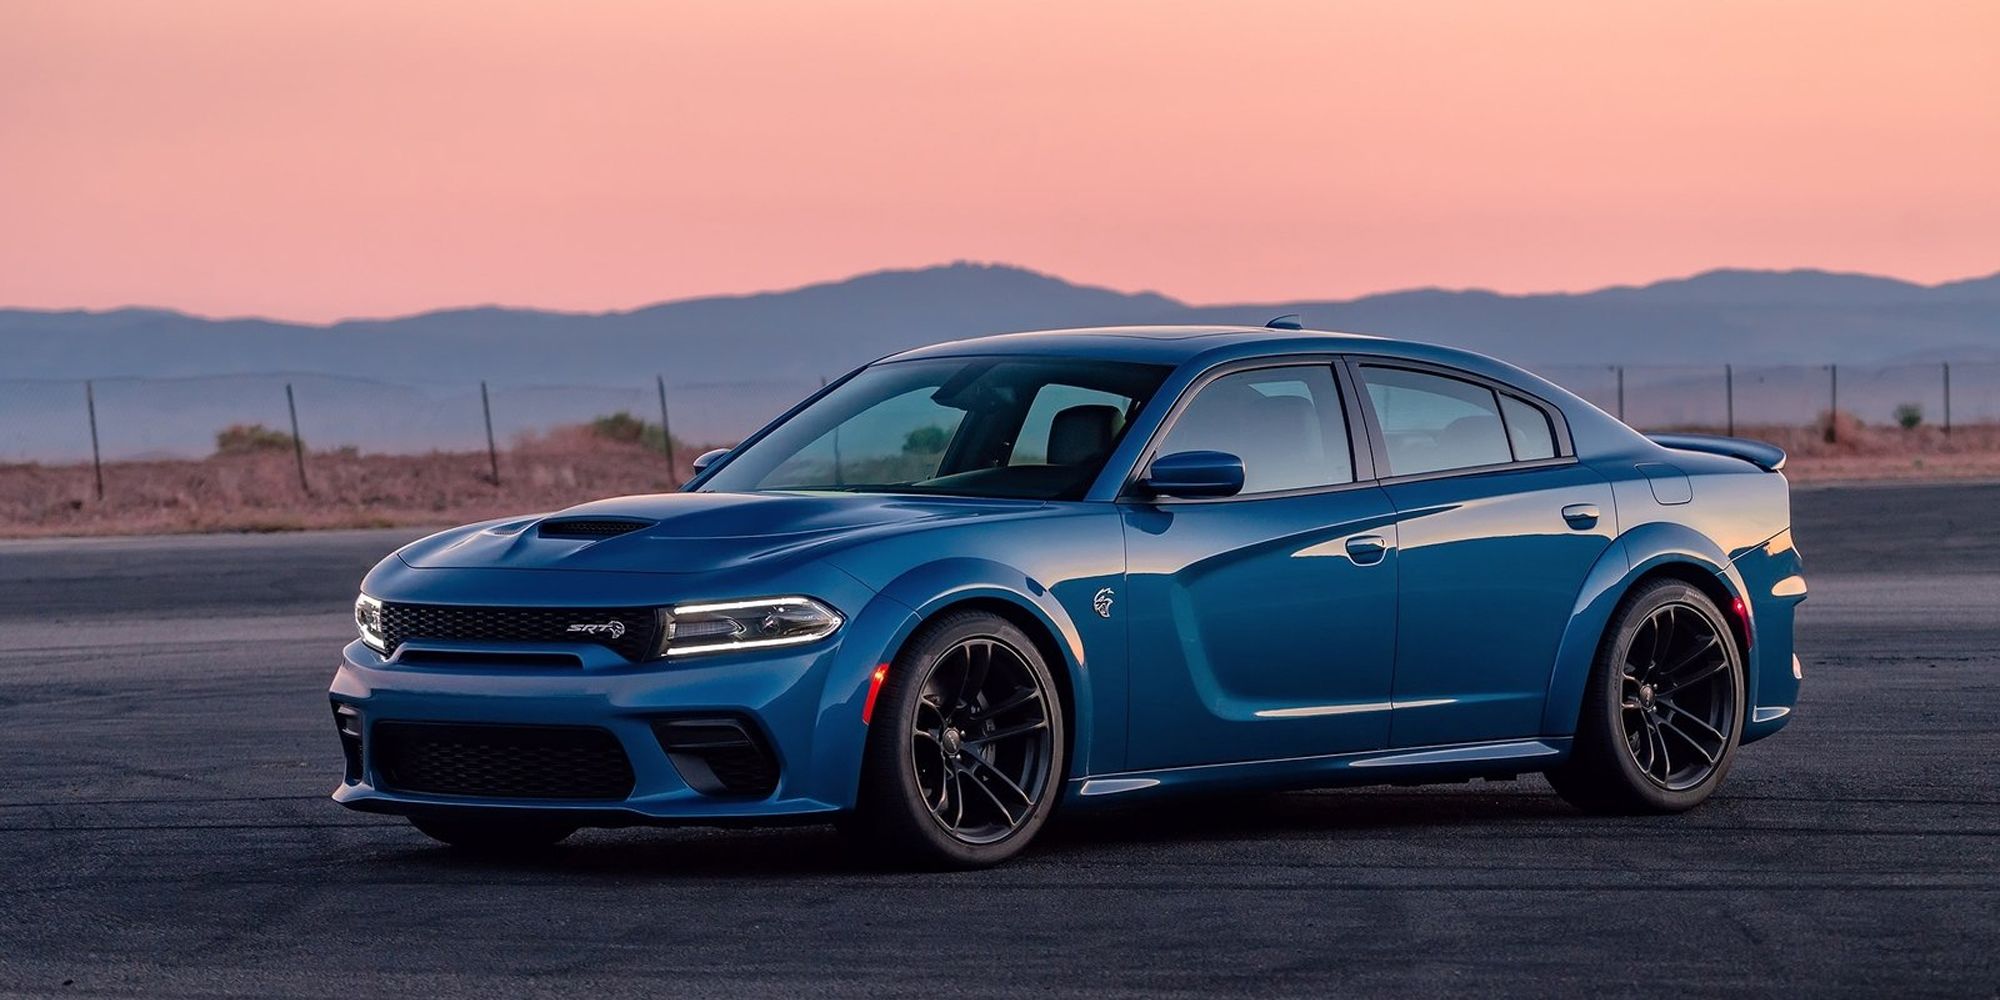 Front 3/4 view of the Charger Hellcat Widebody